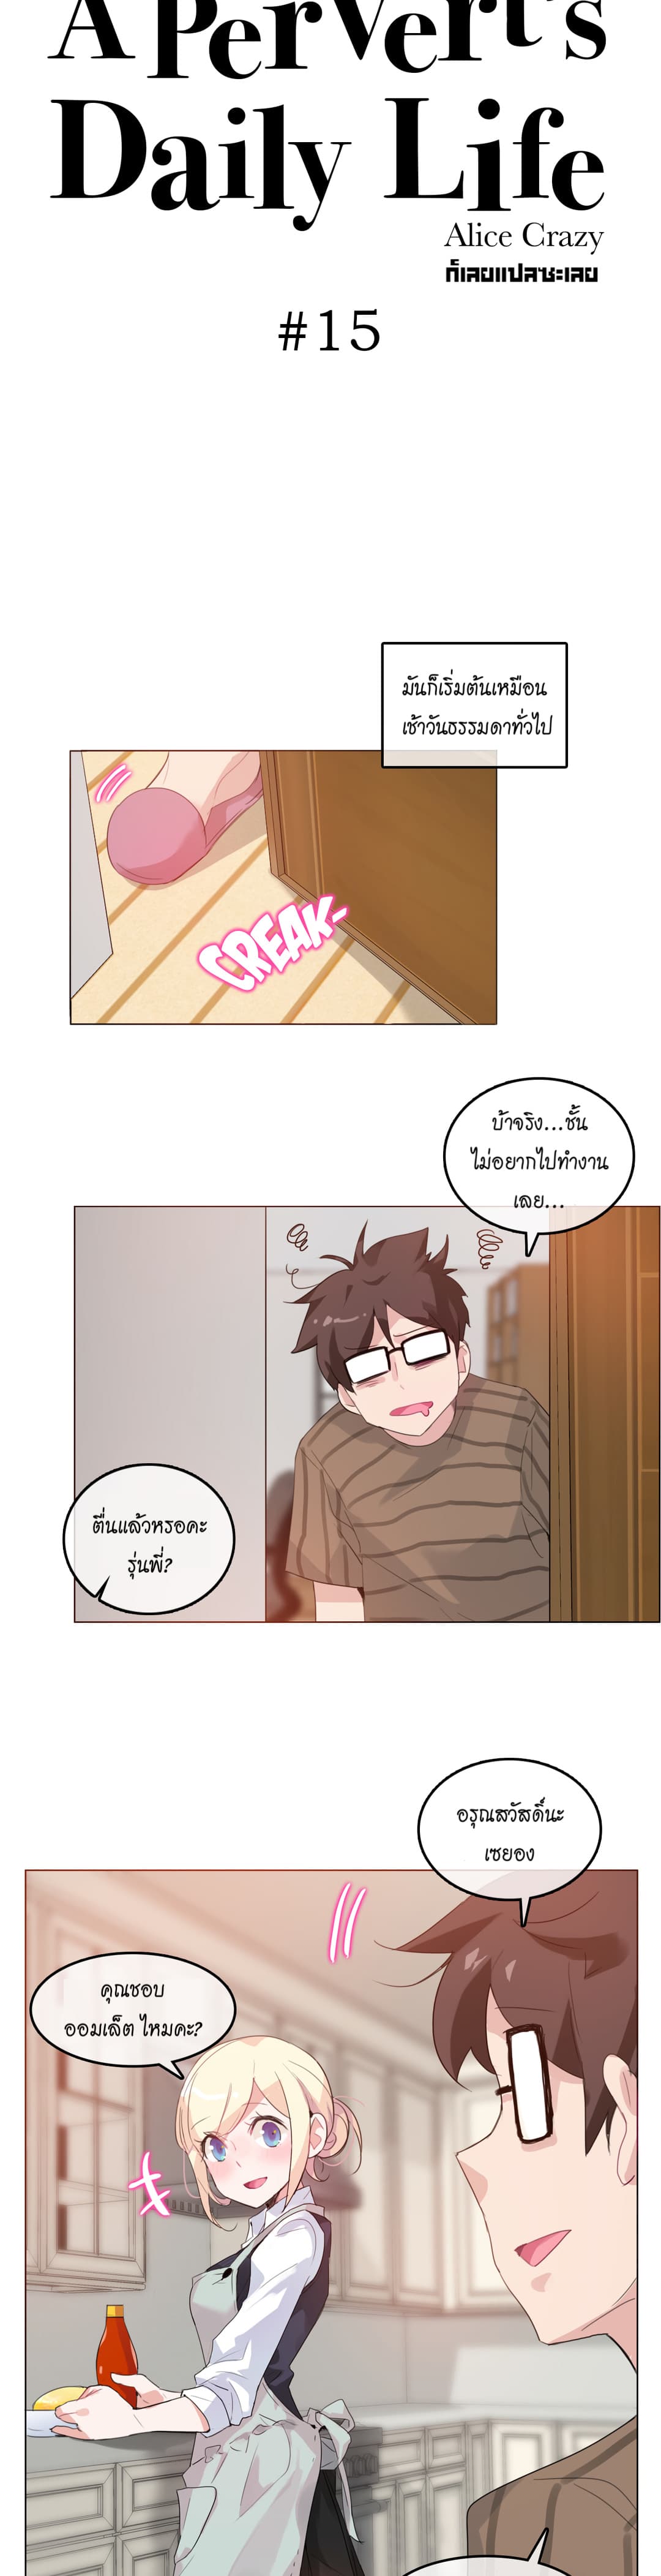 A Pervert’s Daily Life 15 (5)